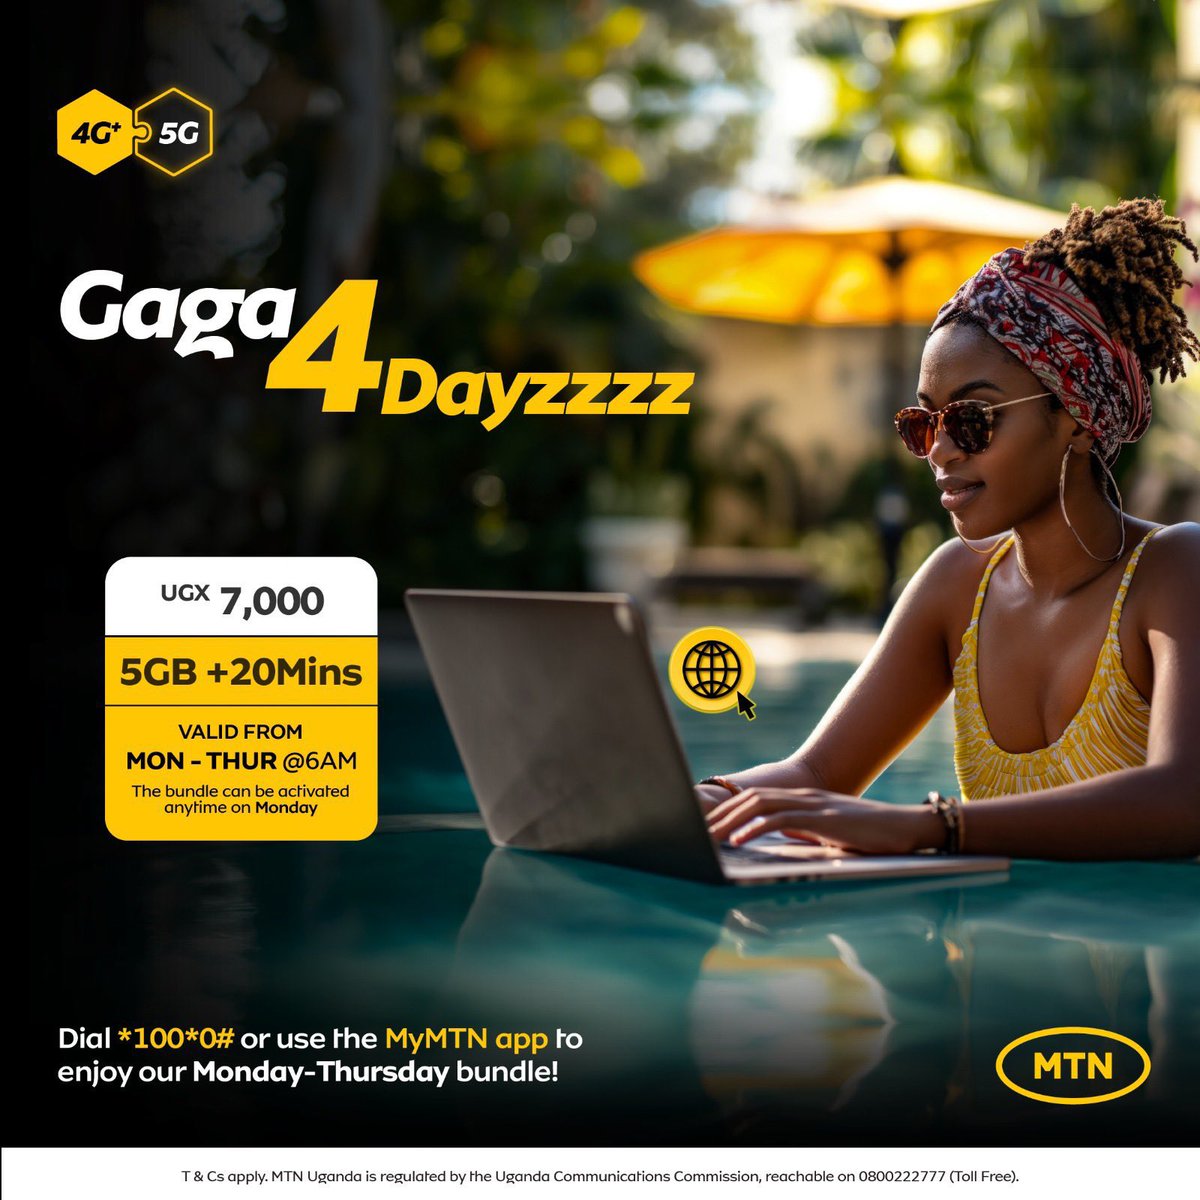 Start your week fresh with #Gaga4Dayzzzz, offering you a seamless journey through the week for only 7k. 

Revel in 5GB of Data + 20 mins, valid until Thursday 6AM. 

Activate the bundle today by dialing *100*0# or via the #MyMTN App.
 #TogetherWeAreUnstoppable!